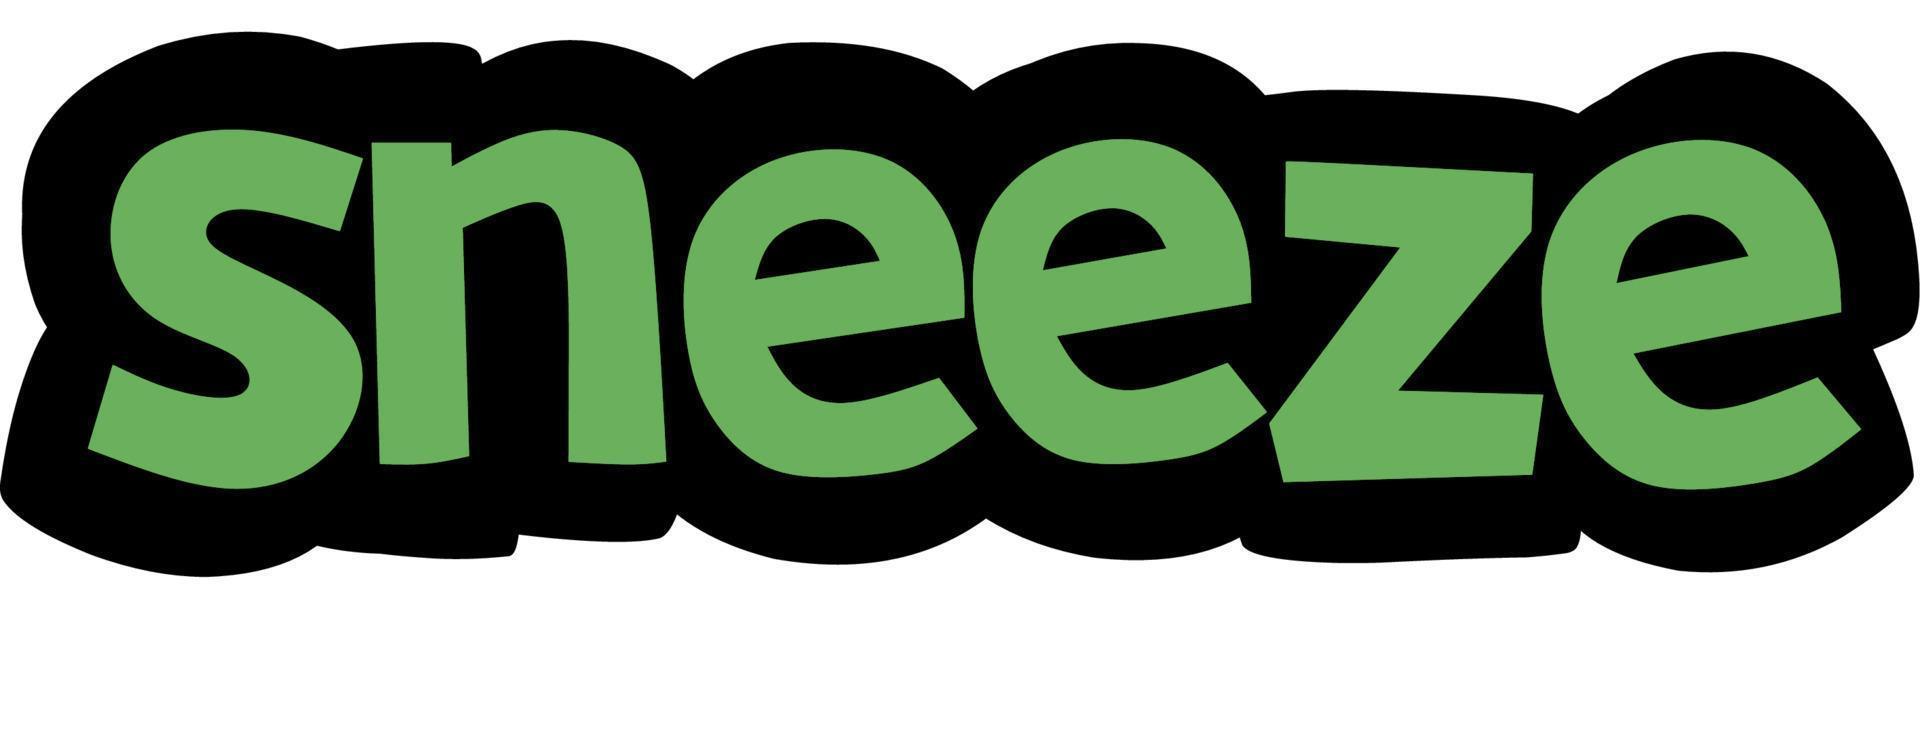 SNEEZE writing vector design on white background